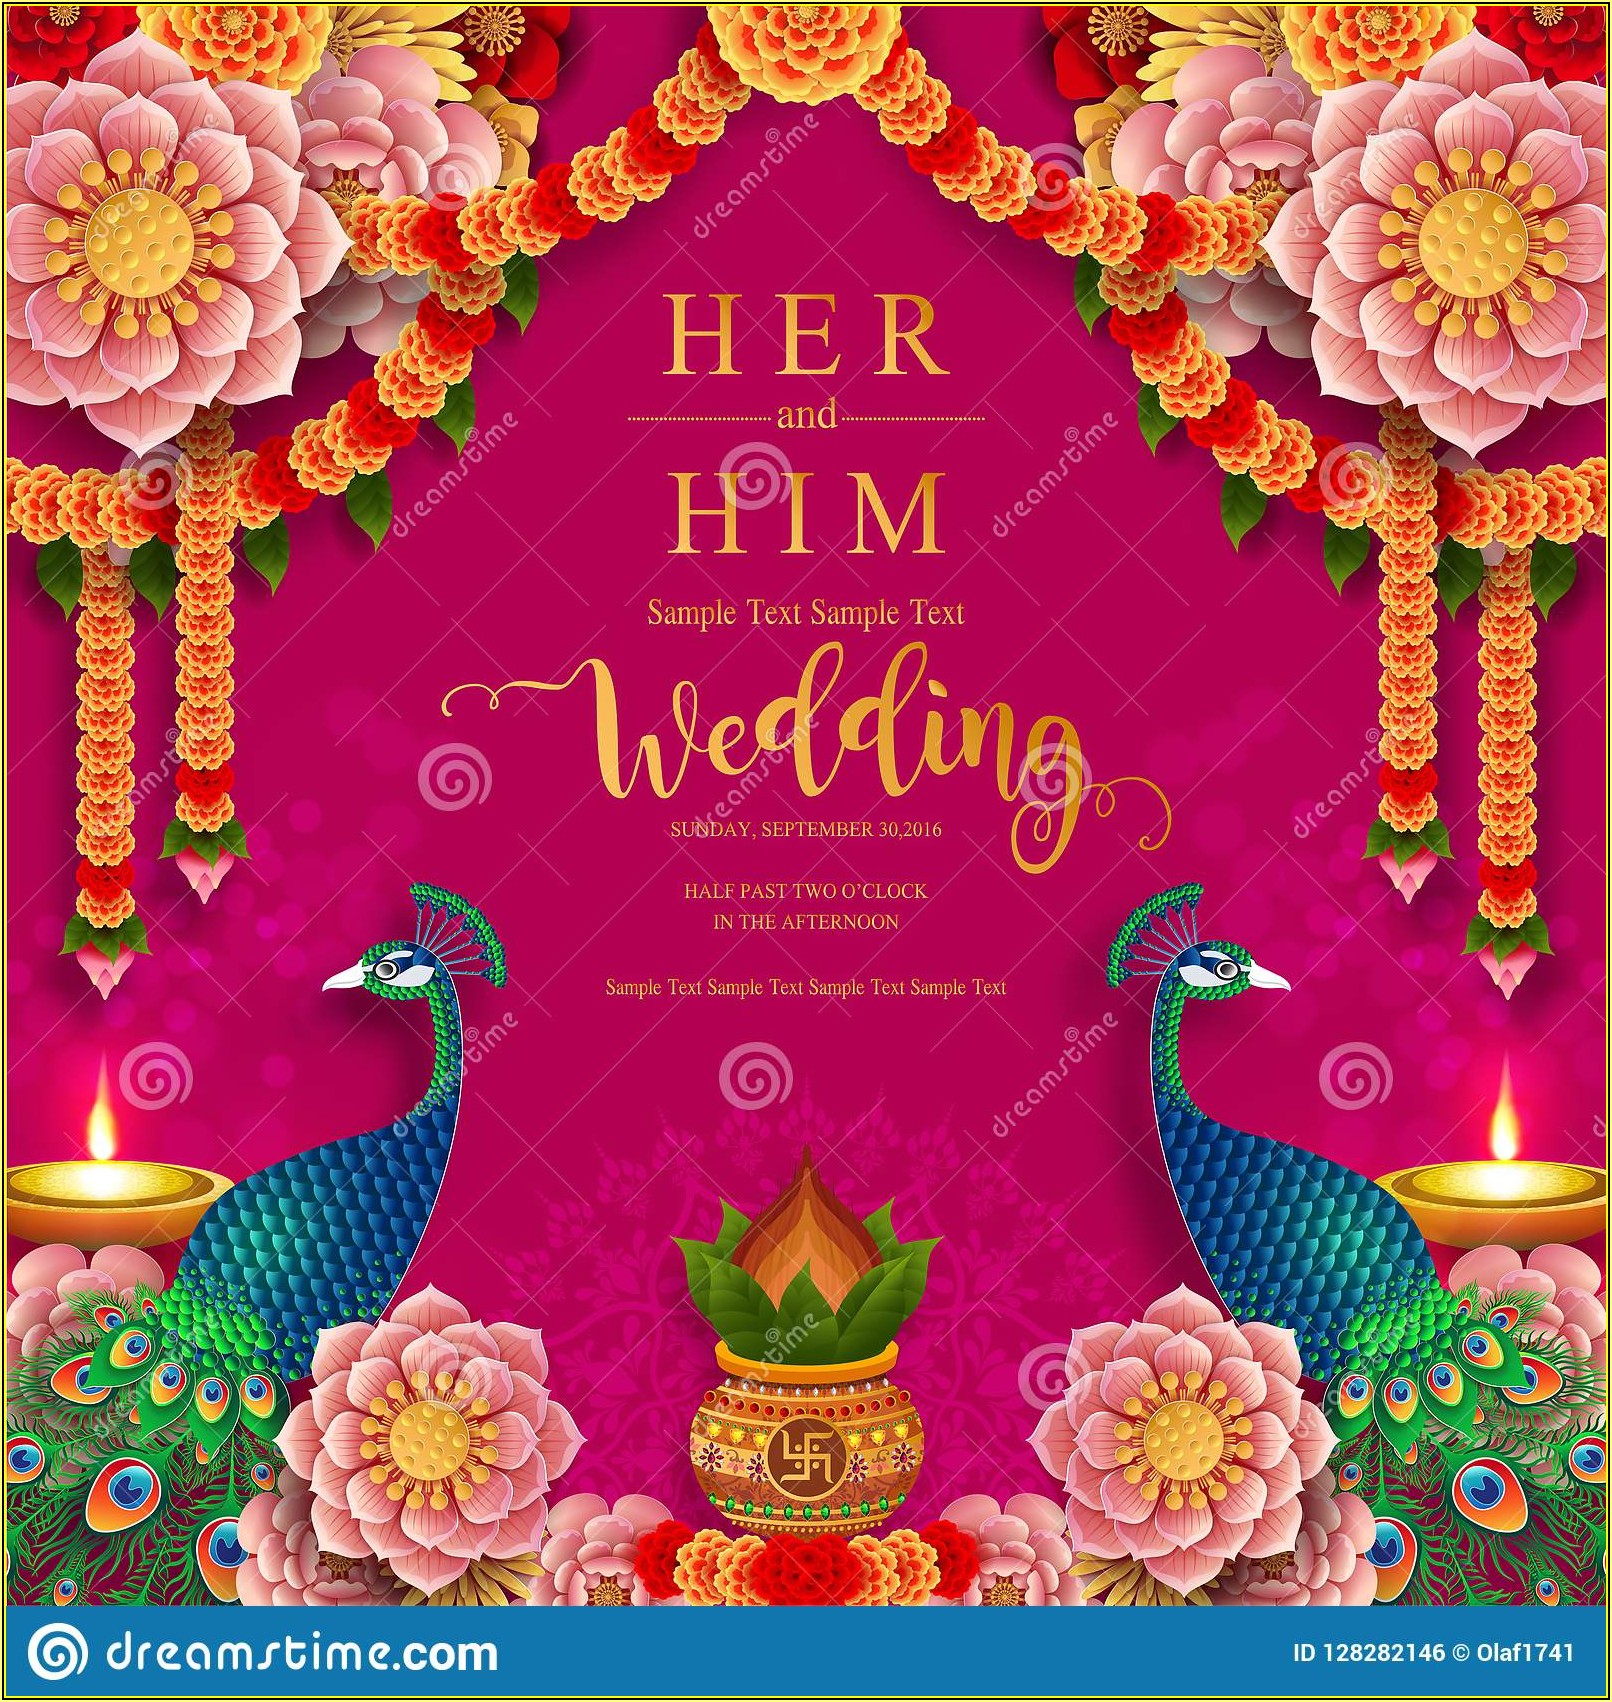 Indian Wedding Invitation Card Template With Gold Patterned And Crystals On Paper Color